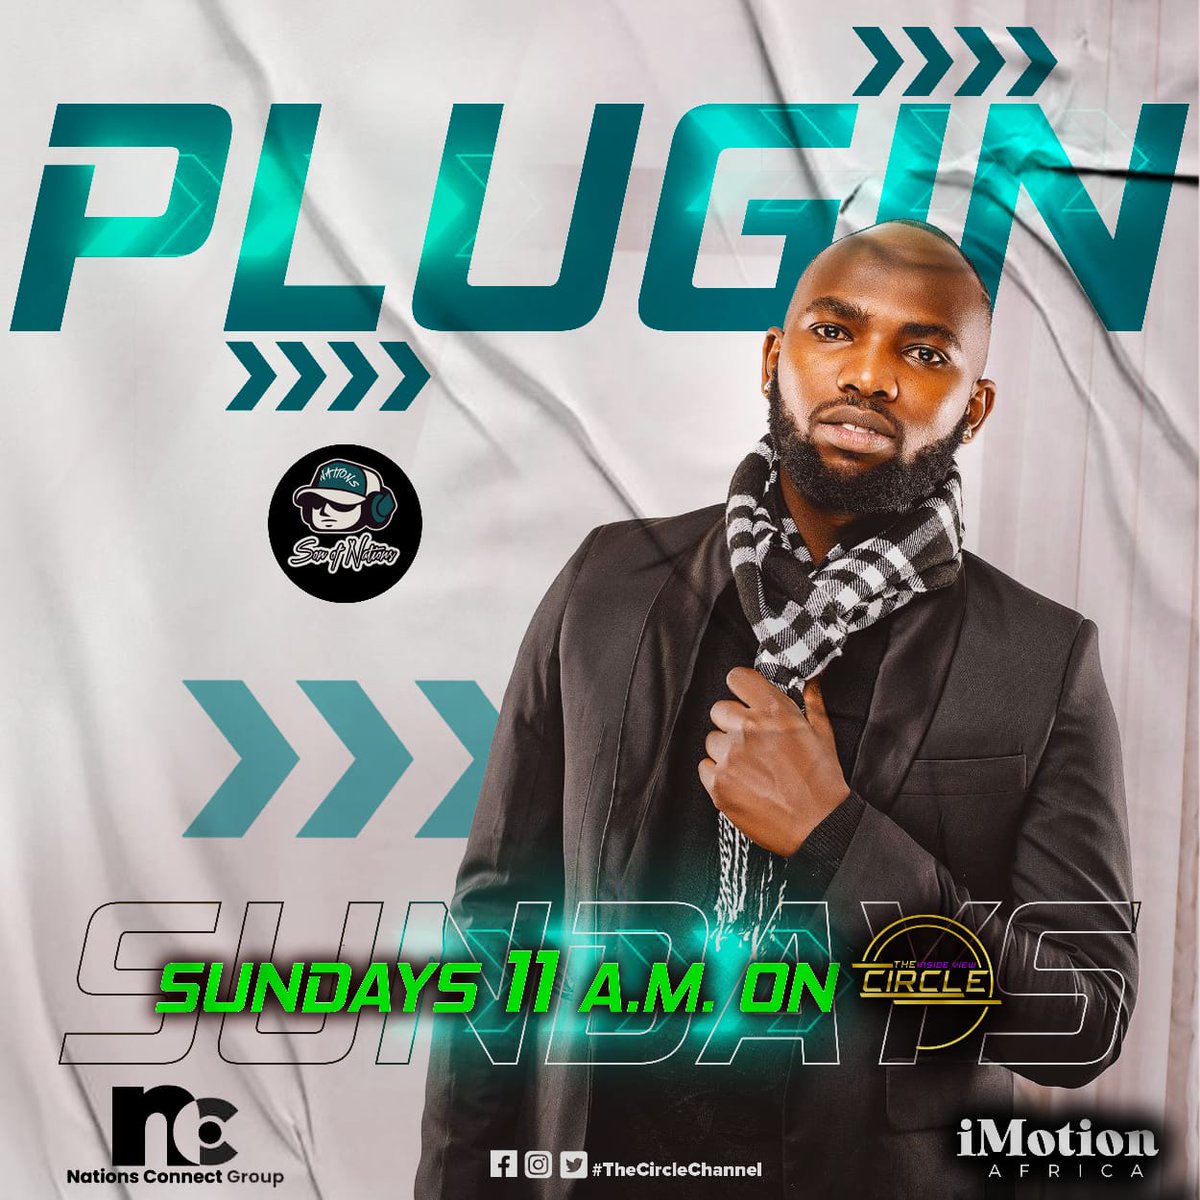 Kickstart your Sundays with a harmonious journey! 🎶 Join us at 11 am for the 'Plugin' show on @TheCircleChannel @sonofnations. Music that sets the perfect tone for your day awaits! 🌞🎵 #PluginShow #SundayVibes #MusicMagic